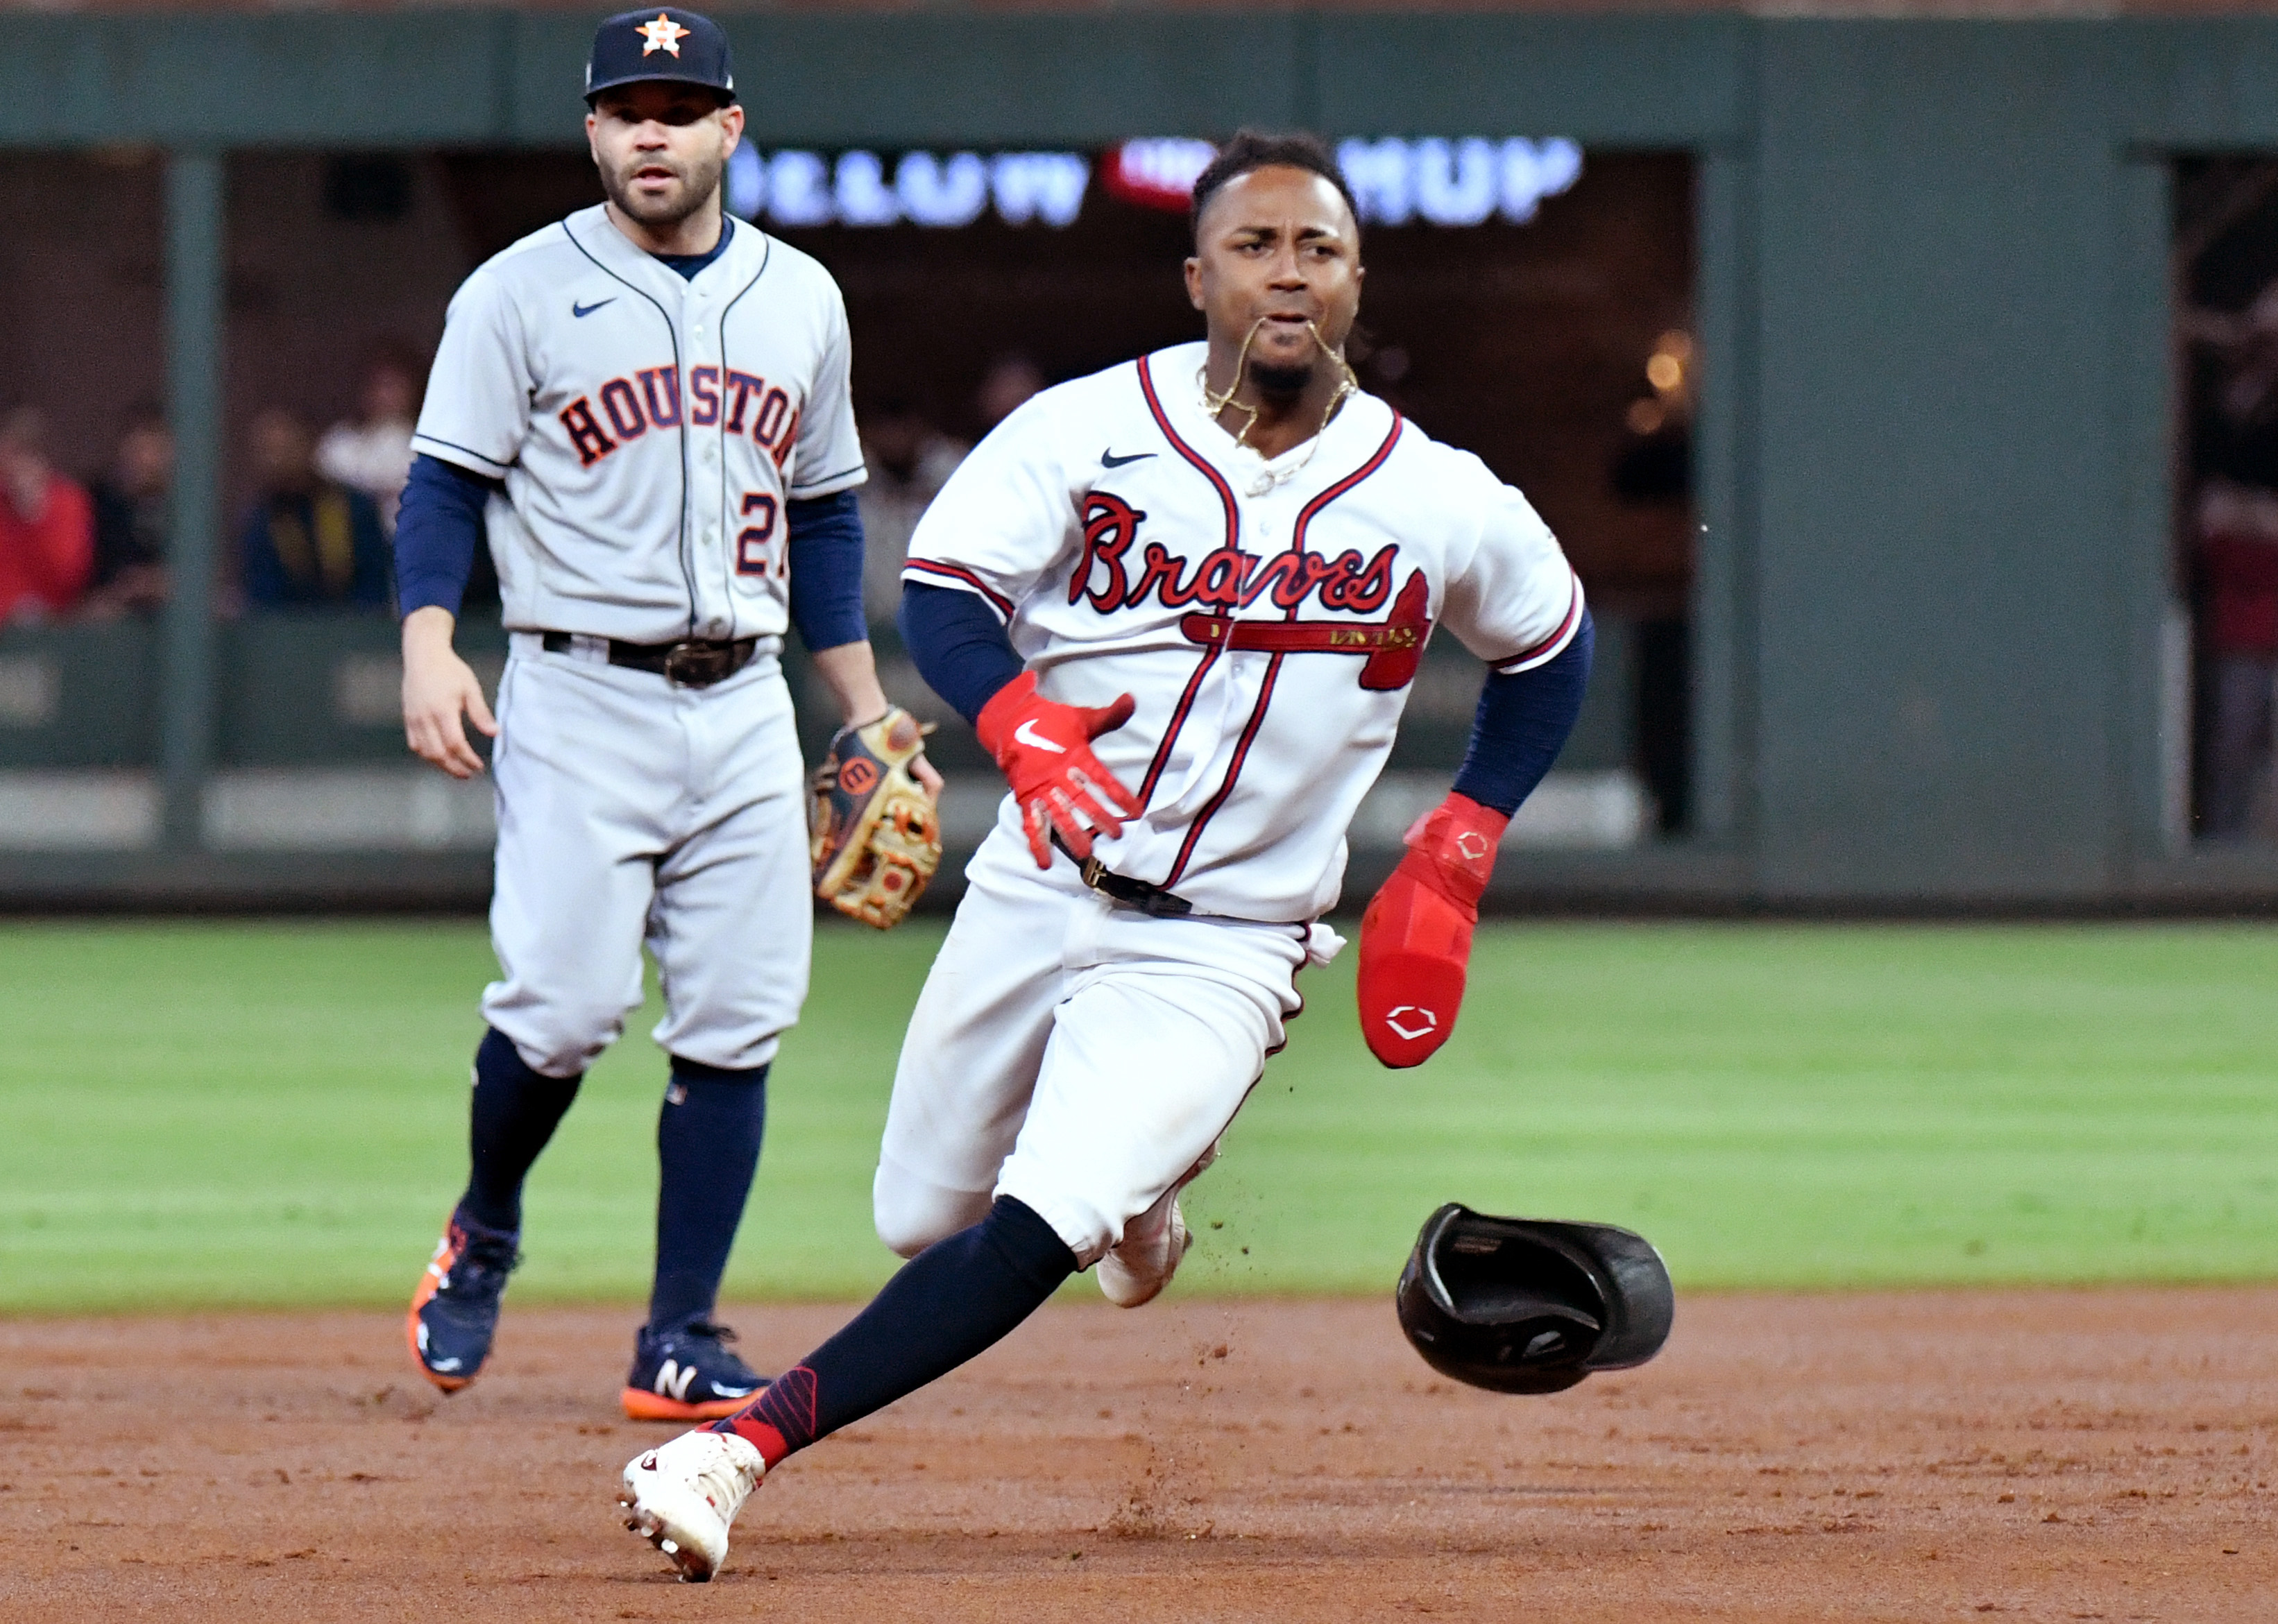 Mark Bradley: It's about time I wrote about the Braves' Ozzie Albies